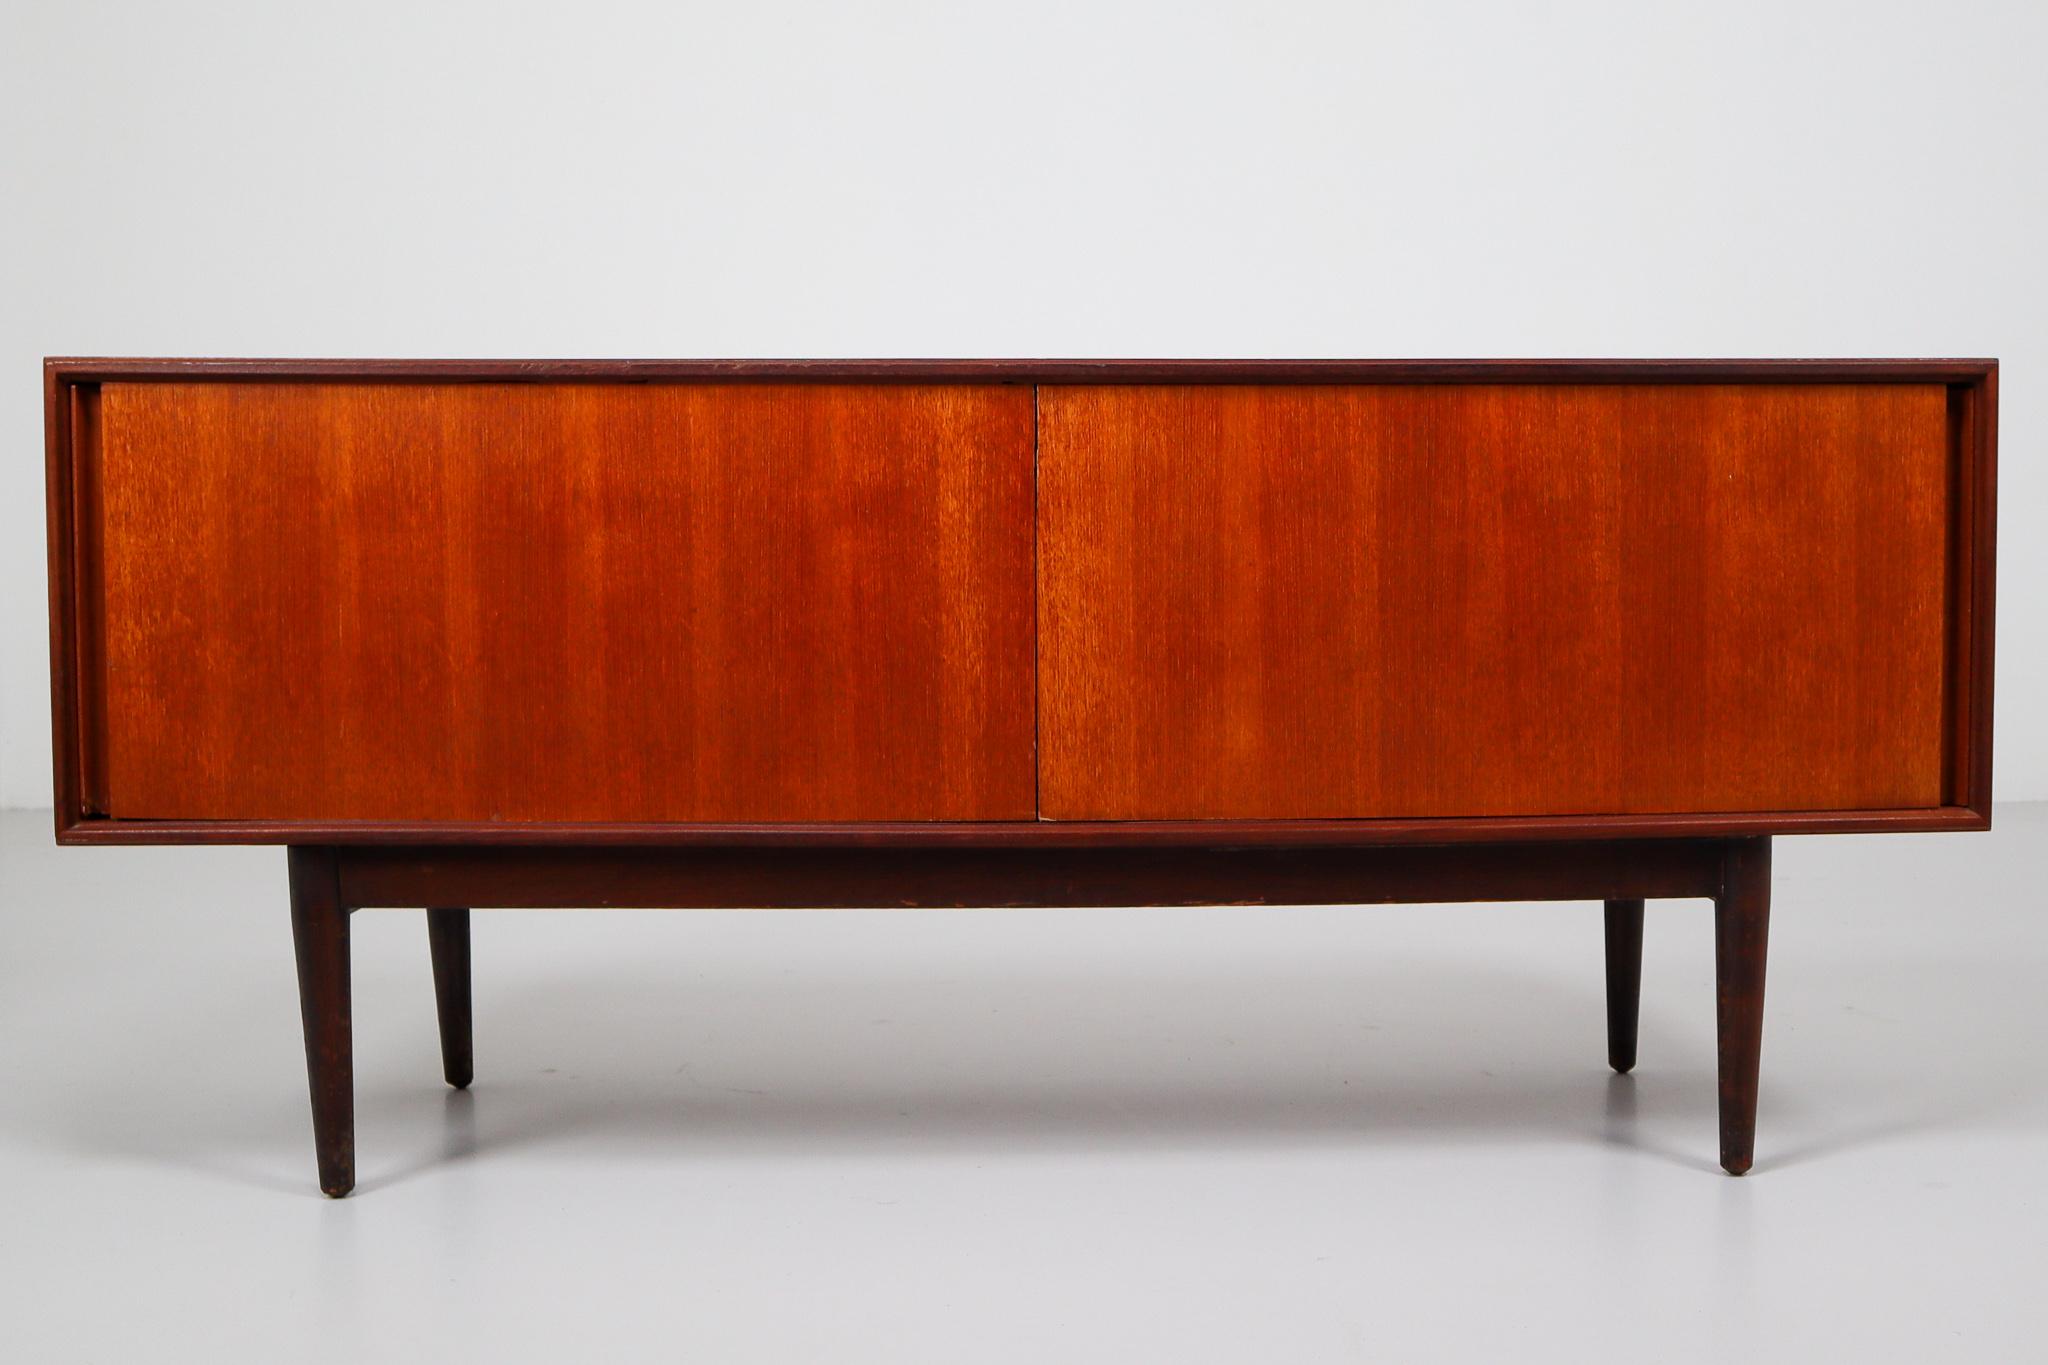 Minimalist Minimalism Teak Sideboard or Credenza from the 1960s, Made in Denmark